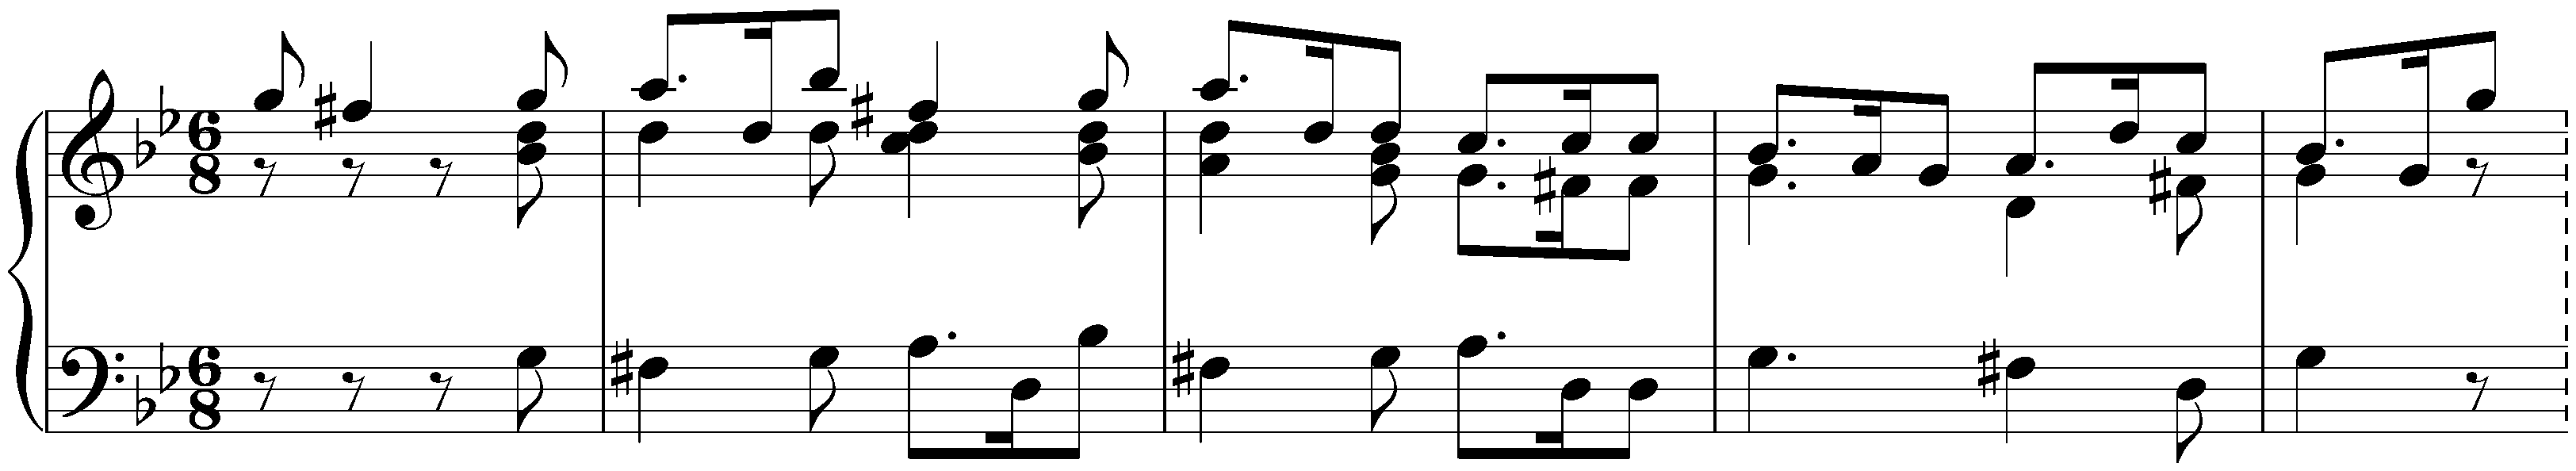 Overture in G minor, BWV 822; 6. Gigue